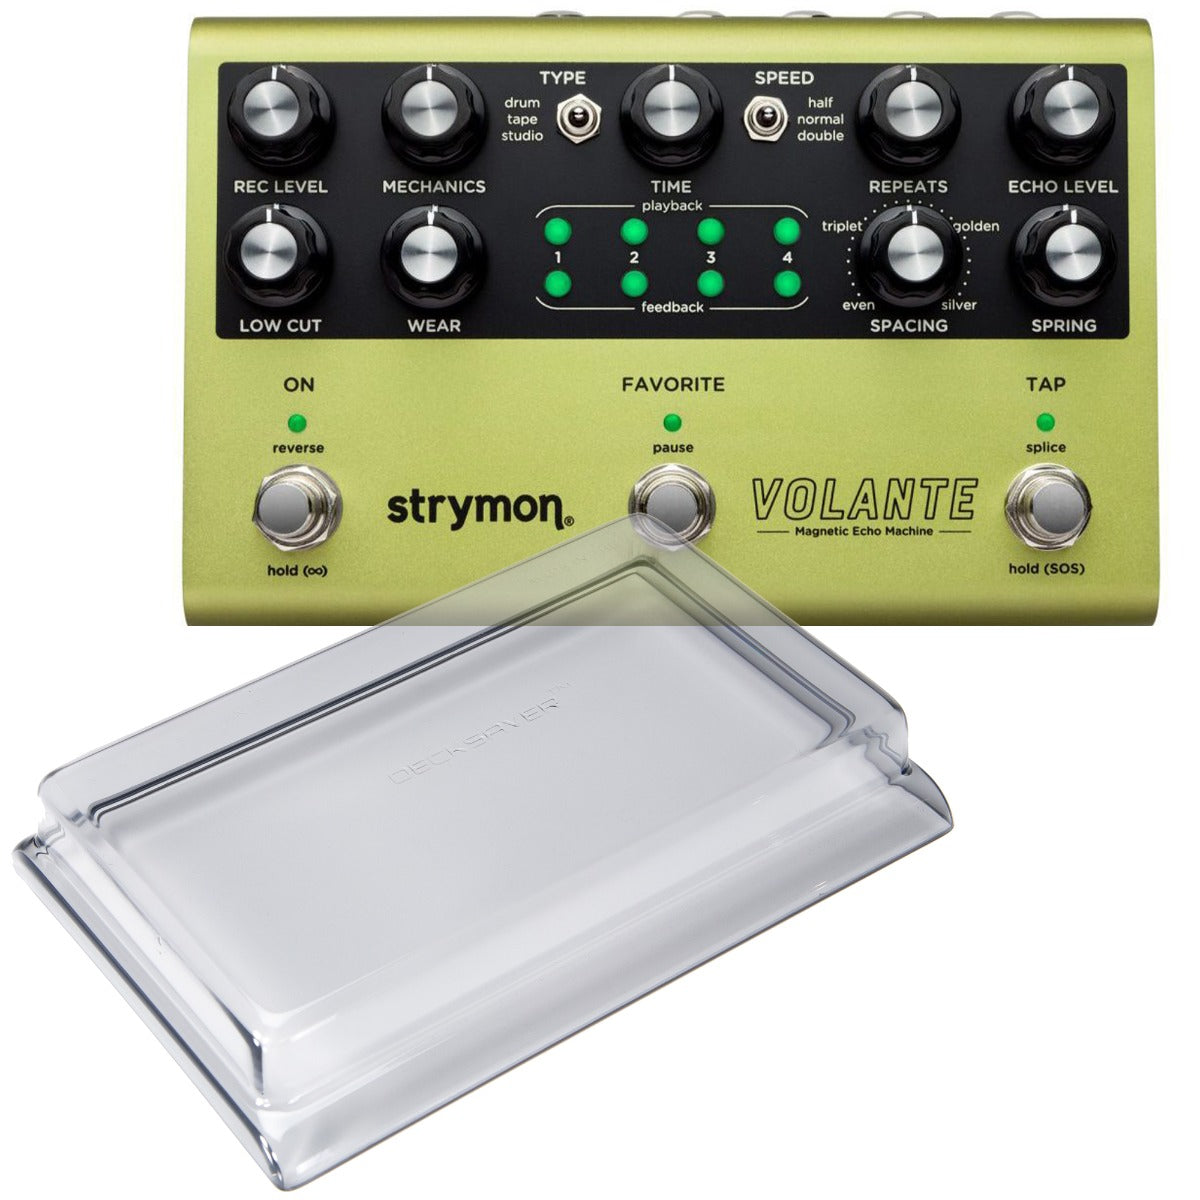 Collage of the components in the Strymon Volante Magnetic Echo Machine Pedal DECKSAVER KIT bundle